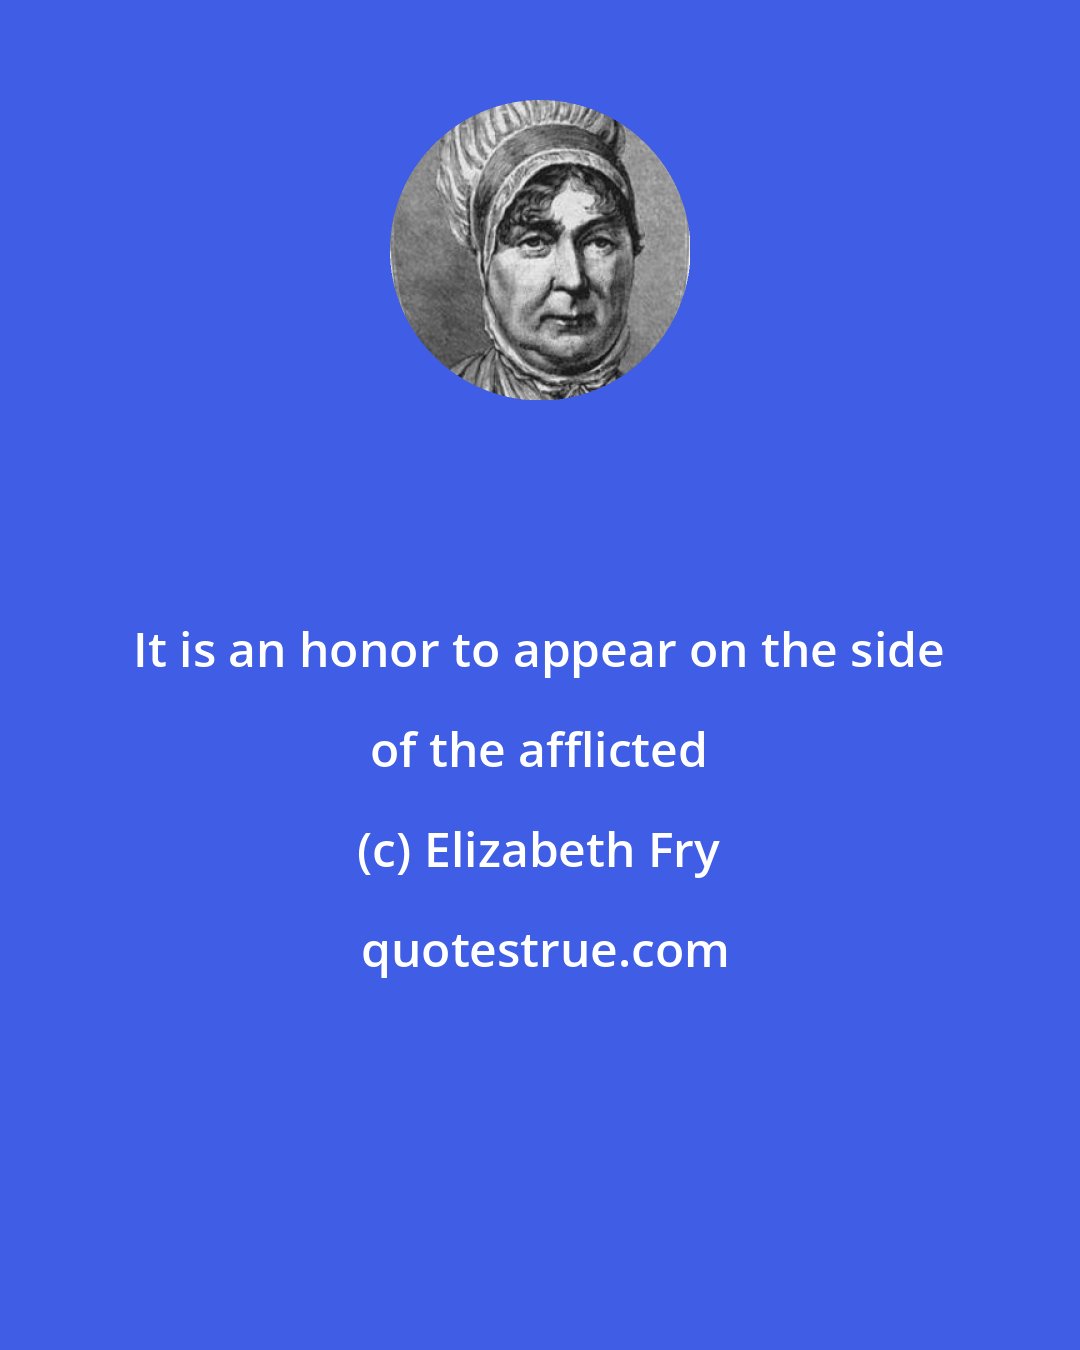 Elizabeth Fry: It is an honor to appear on the side of the afflicted